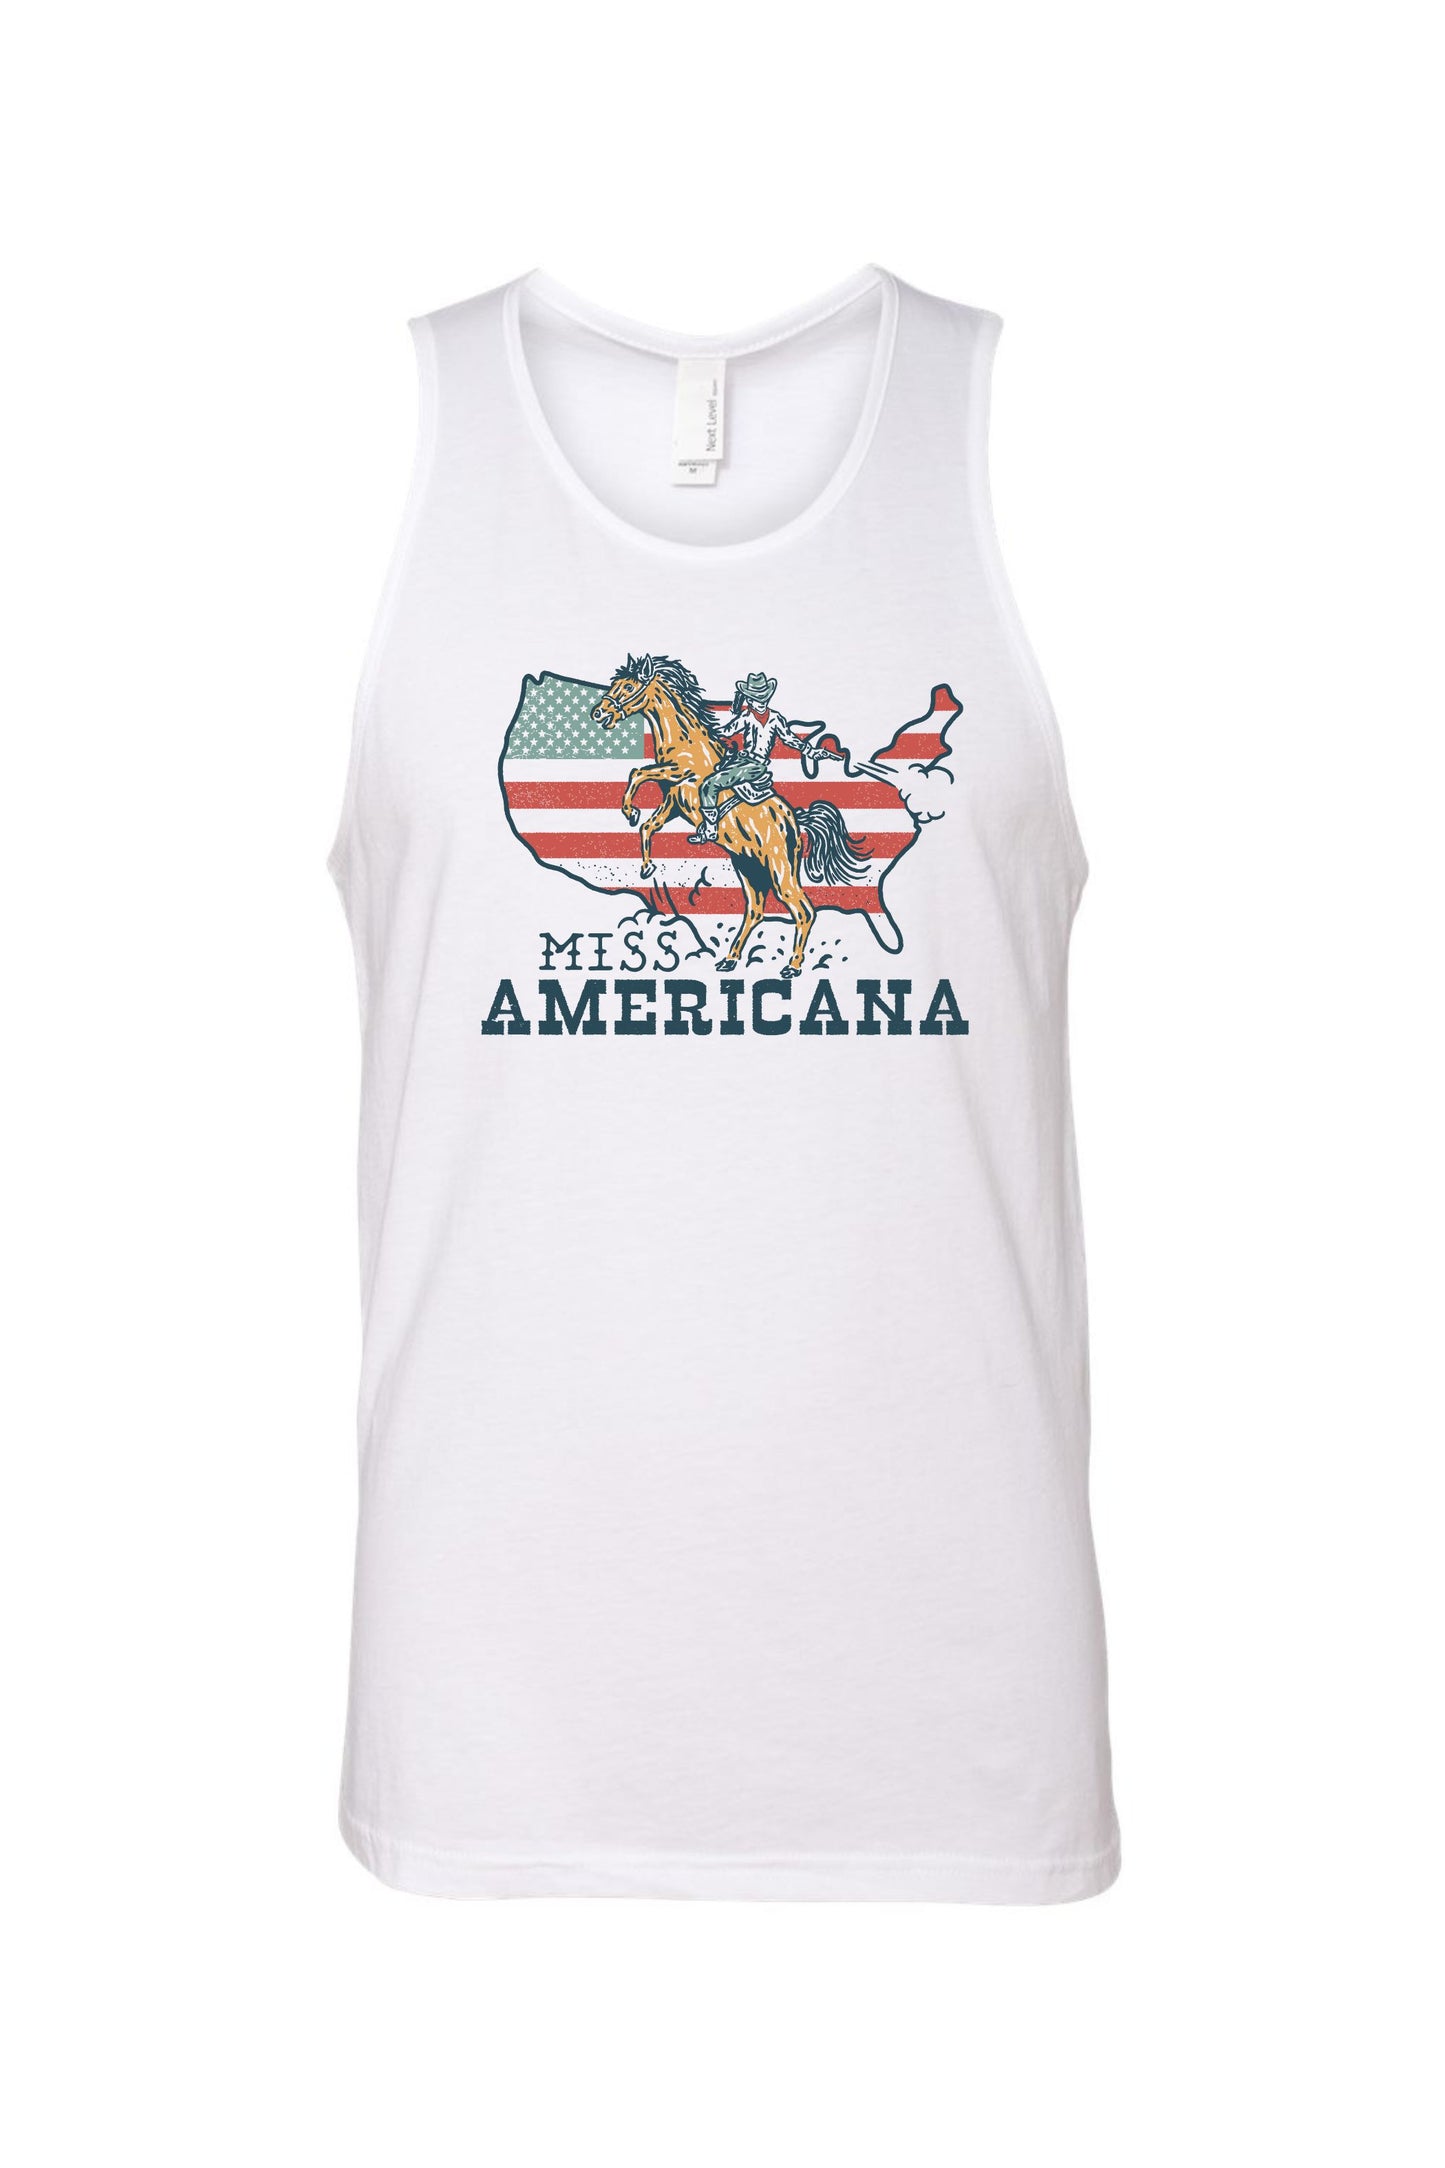 Miss Americana | Adult Tank-Sister Shirts-Sister Shirts, Cute & Custom Tees for Mama & Littles in Trussville, Alabama.